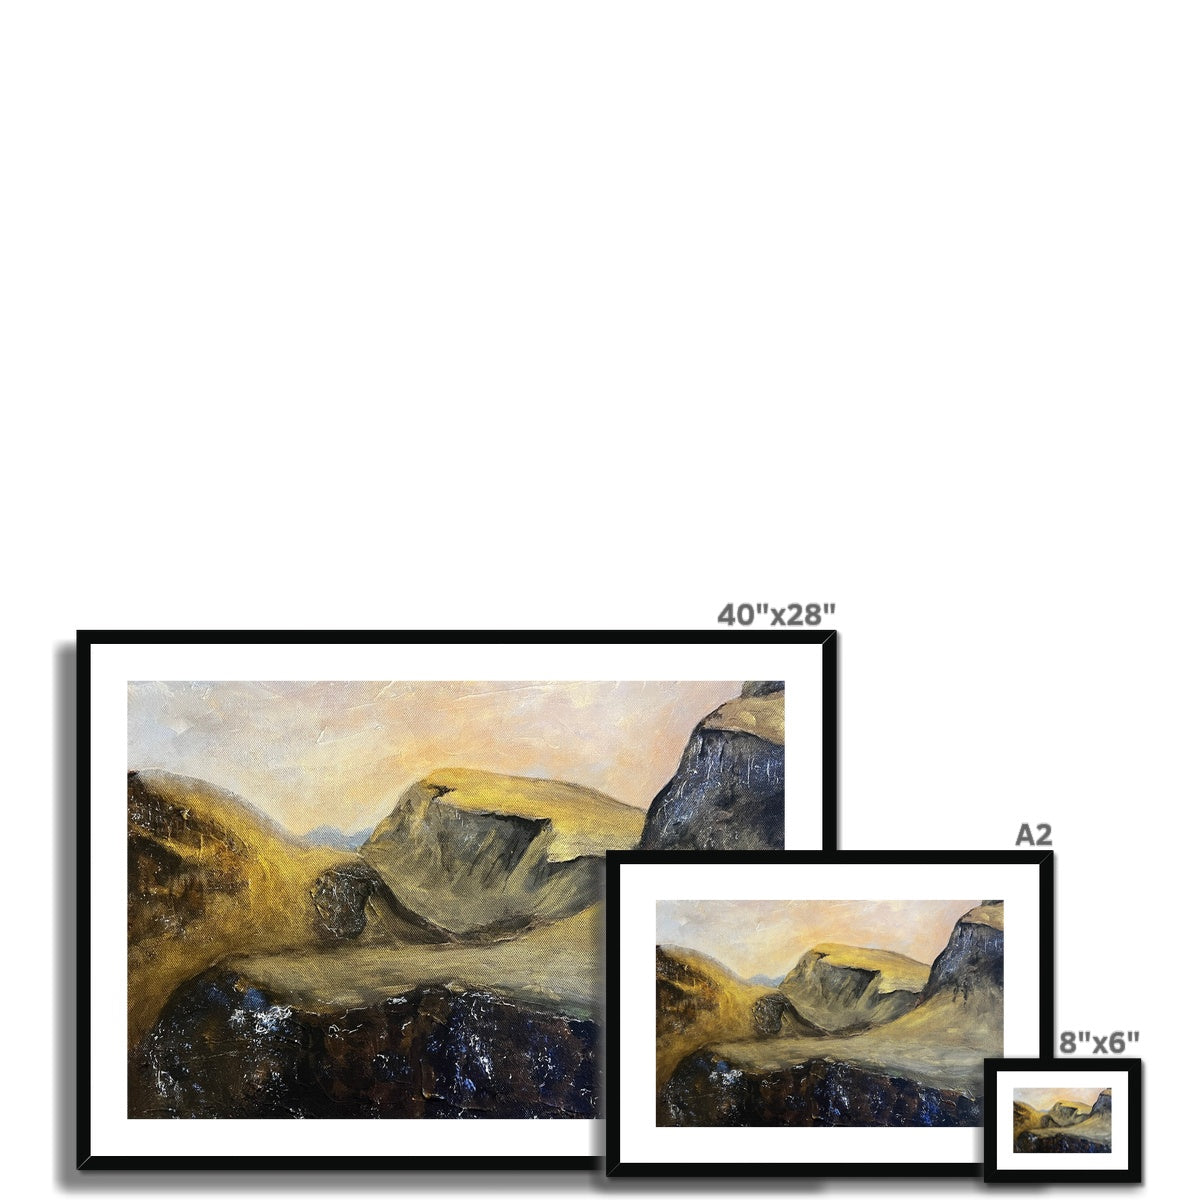 The Quiraing Skye Painting | Framed & Mounted Prints From Scotland-Framed & Mounted Prints-Skye Art Gallery-Paintings, Prints, Homeware, Art Gifts From Scotland By Scottish Artist Kevin Hunter